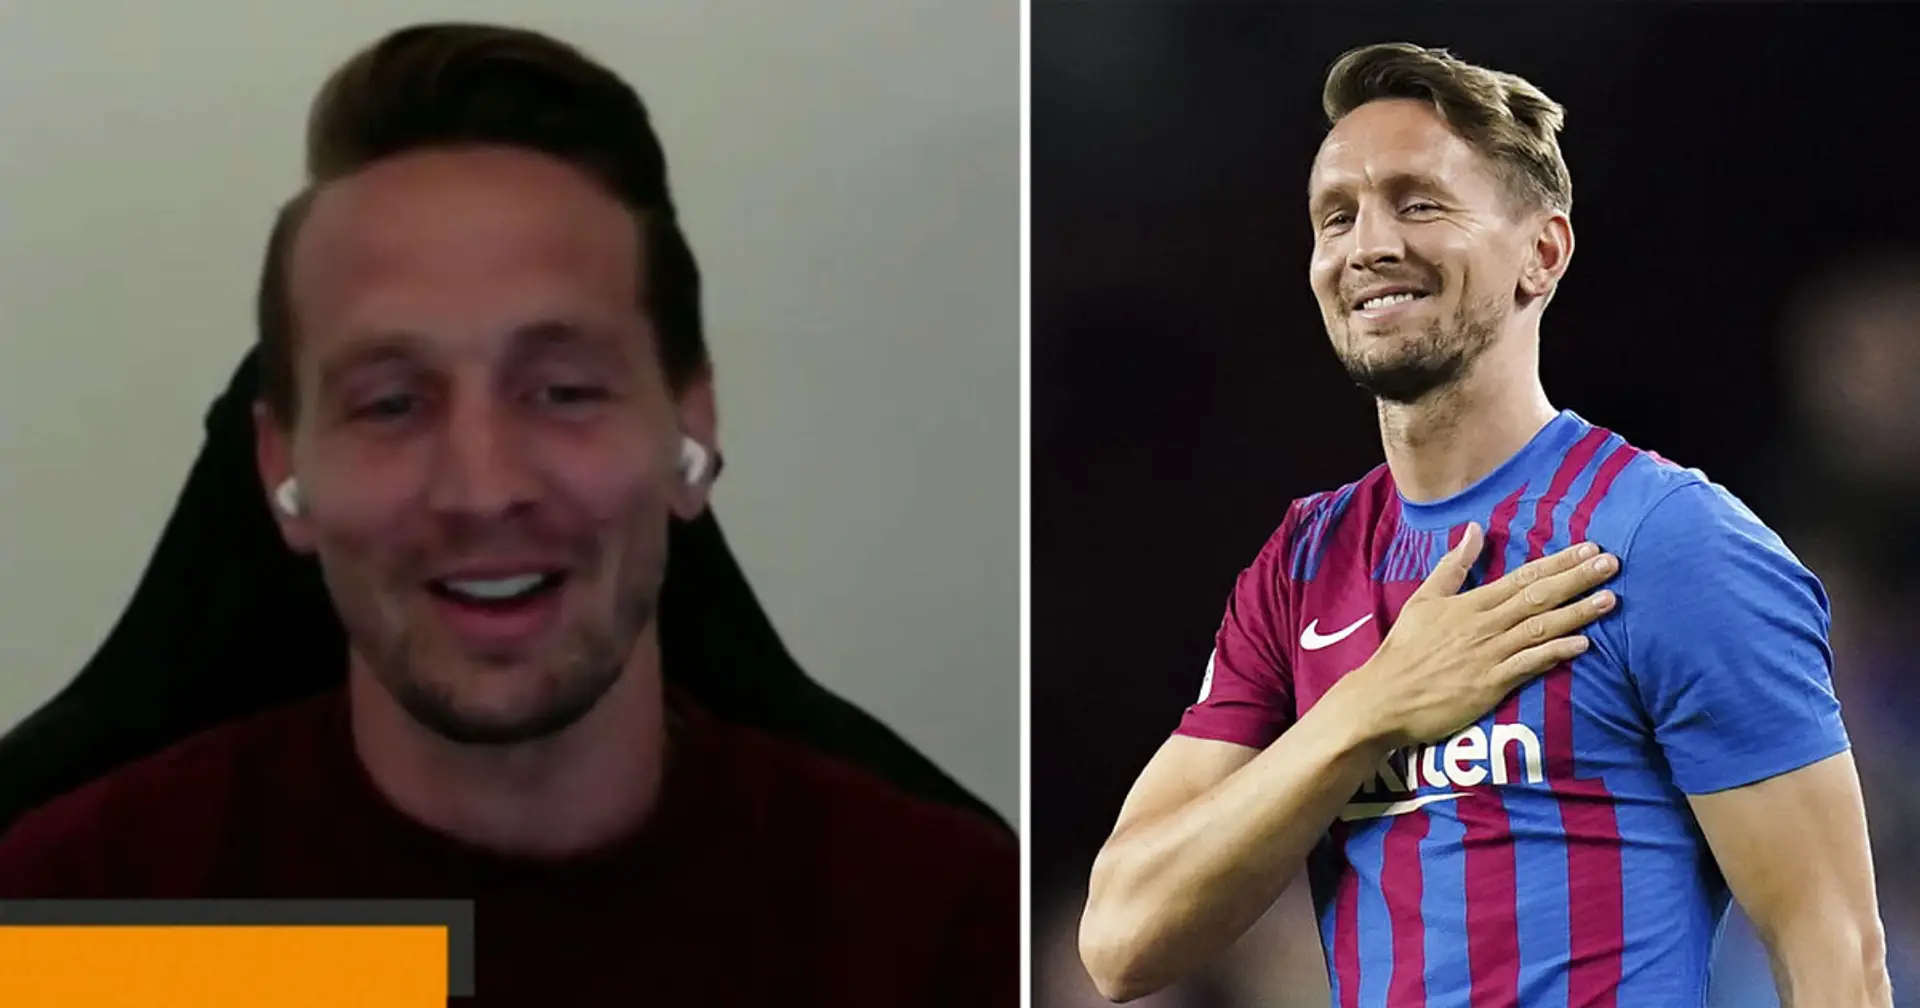 'I will never forget that Camp Nou chanted my name': Luuk de Jong opens up on Barca experience